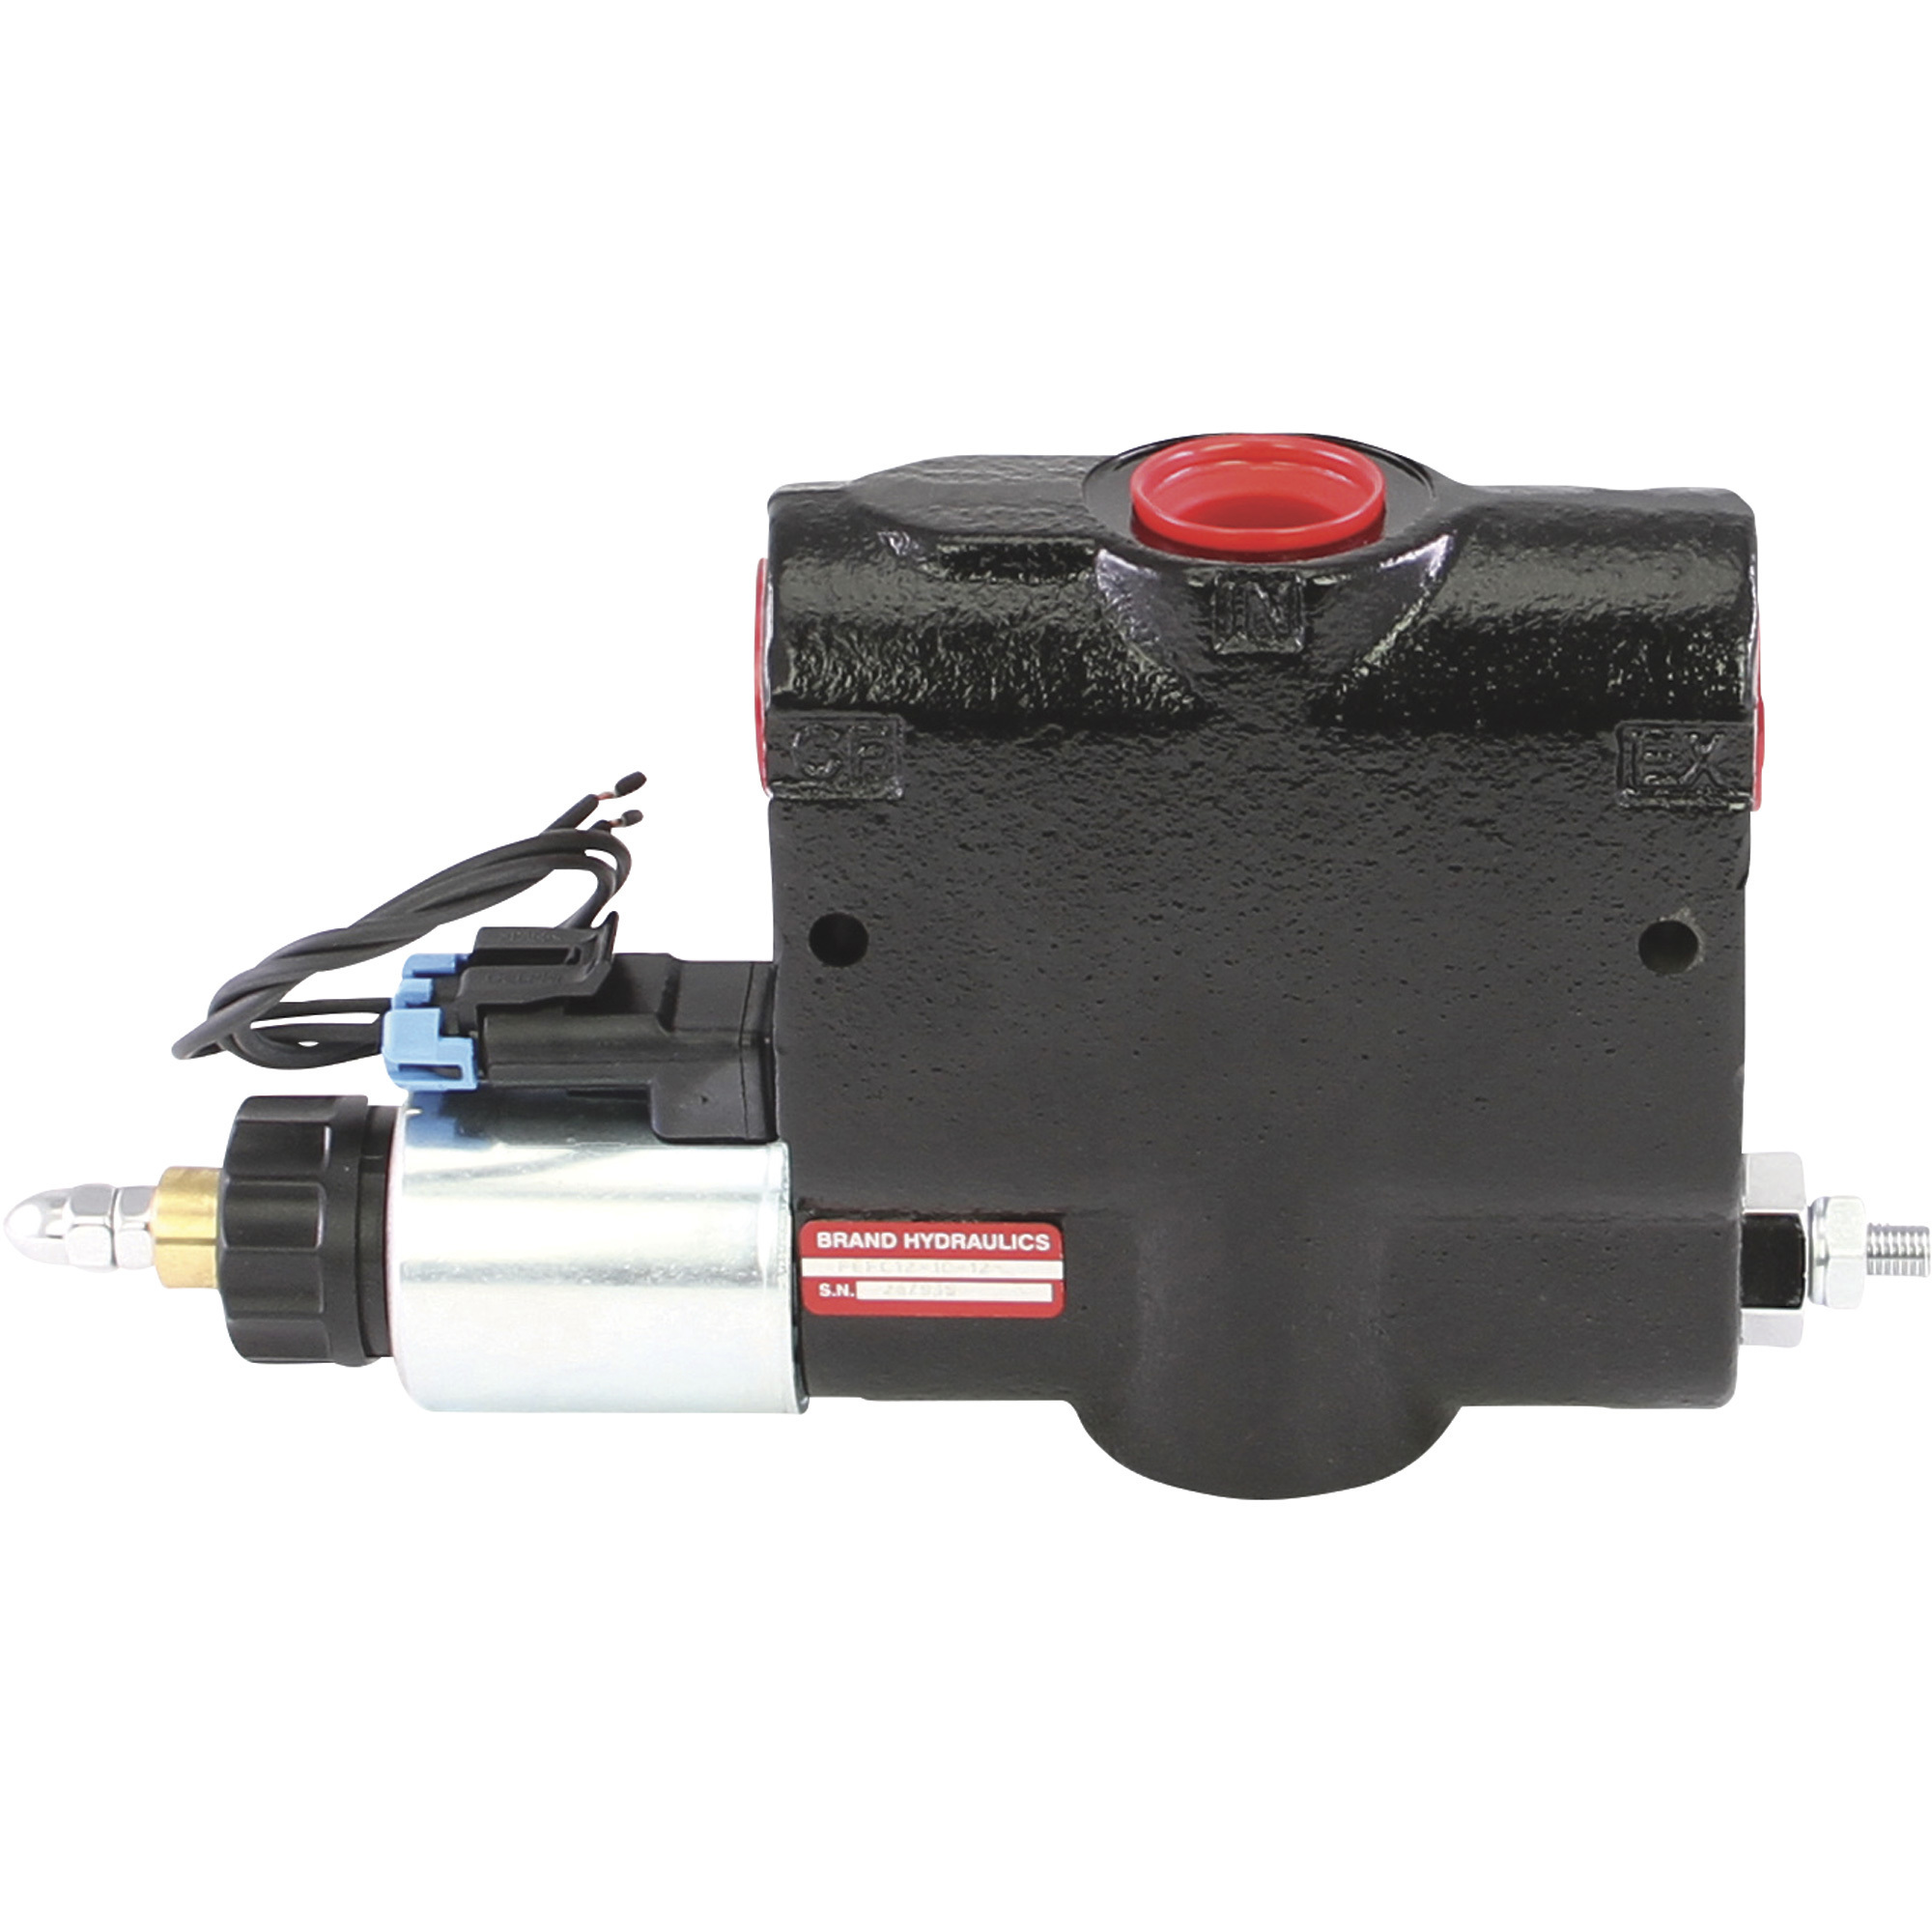 Brand Hydraulics Electronically Adjustable Flow Control Valve â 0â20 GPM, 3,000 PSI, Model PEFC12-20-12